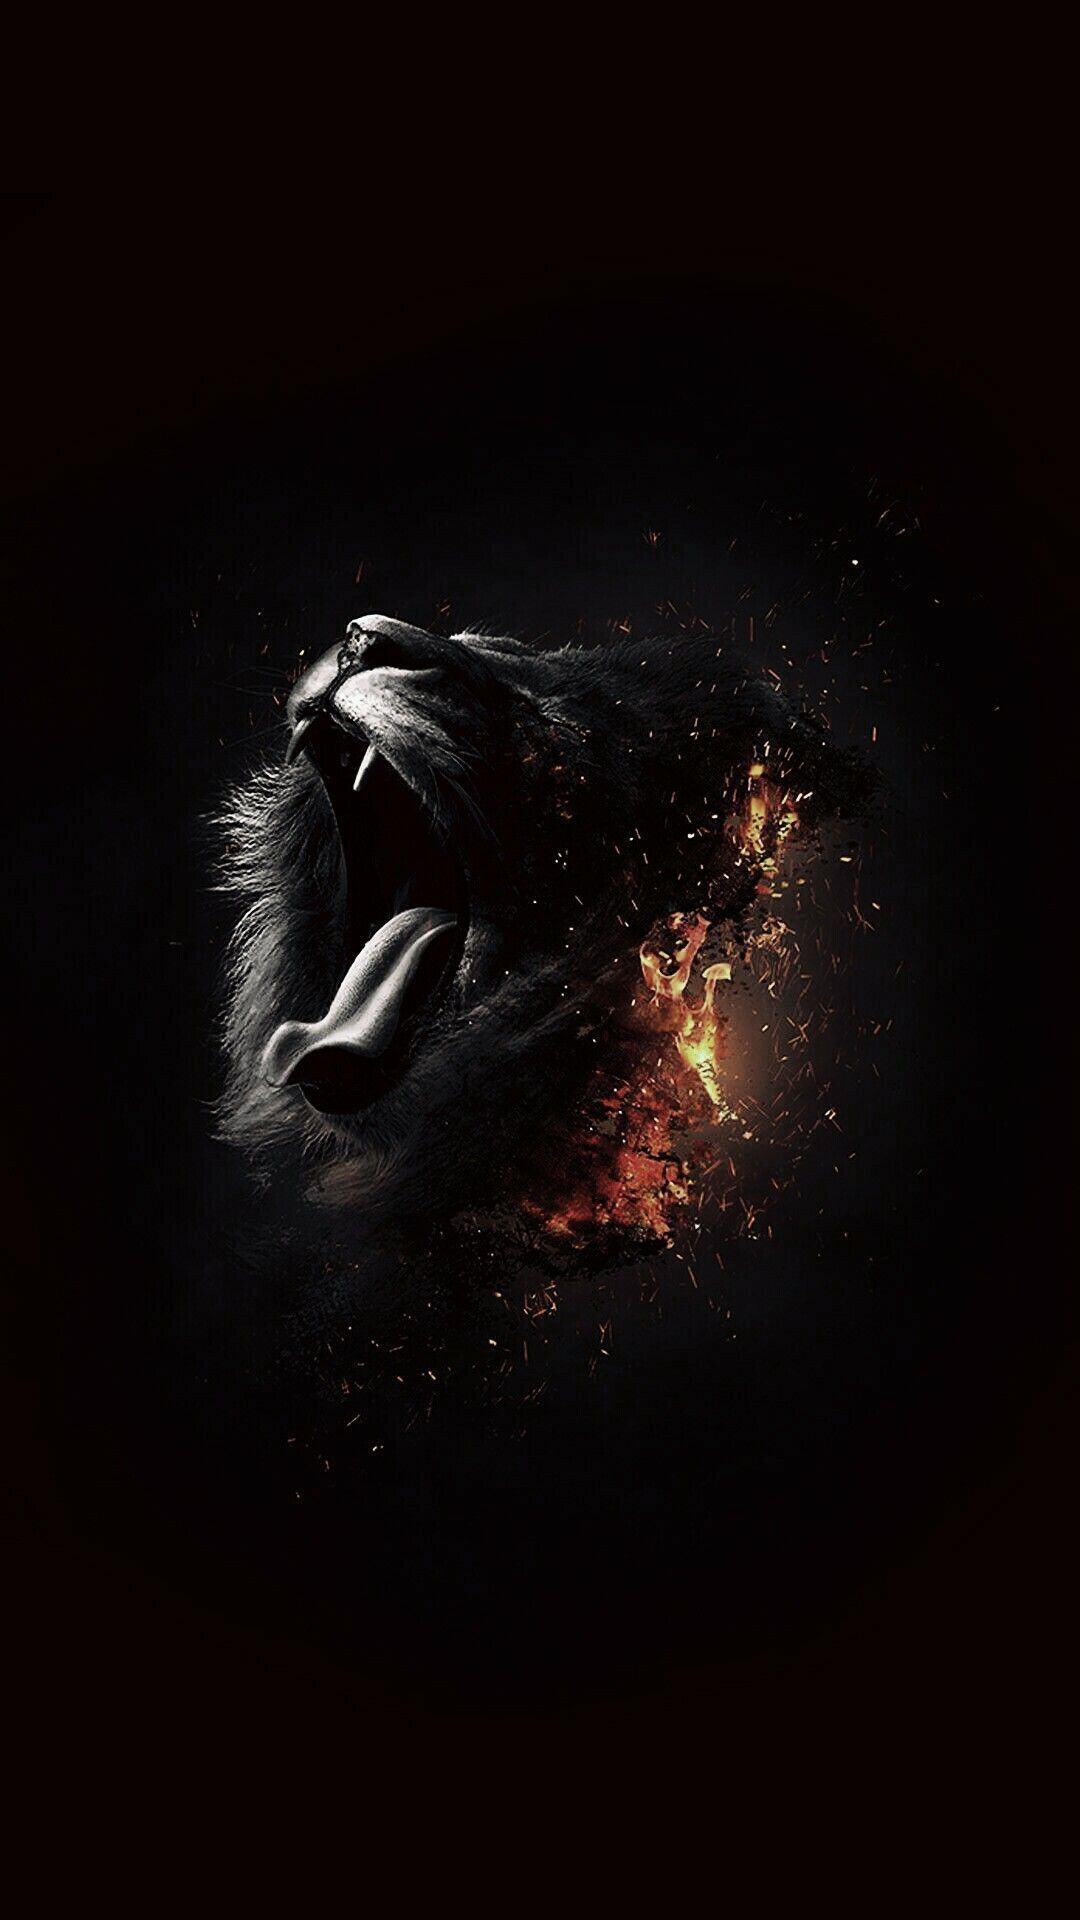 Badass Aesthetic Background Picture. Lion wallpaper iphone, Lion wallpaper, iPhone wallpaper iphone x